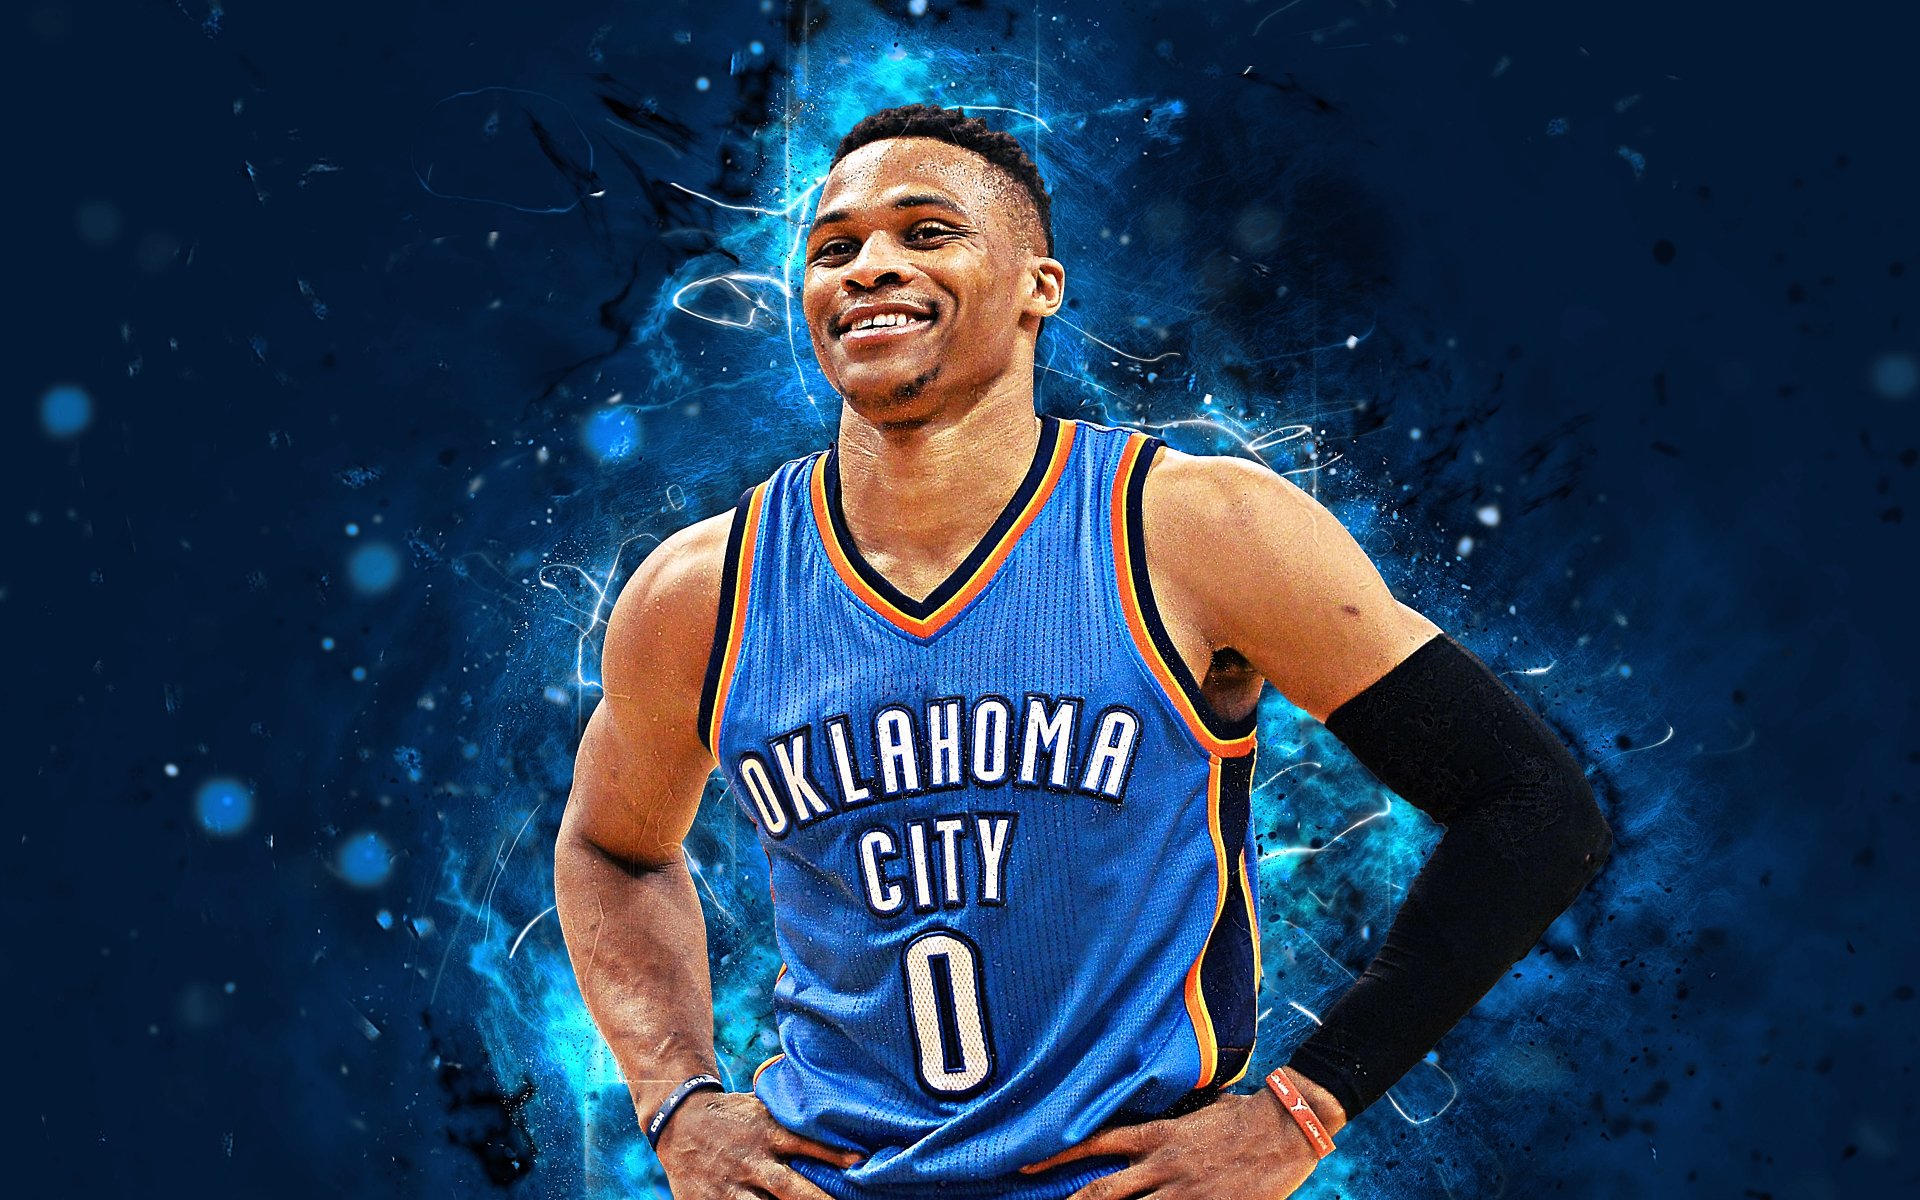 100+] Russell Westbrook Backgrounds